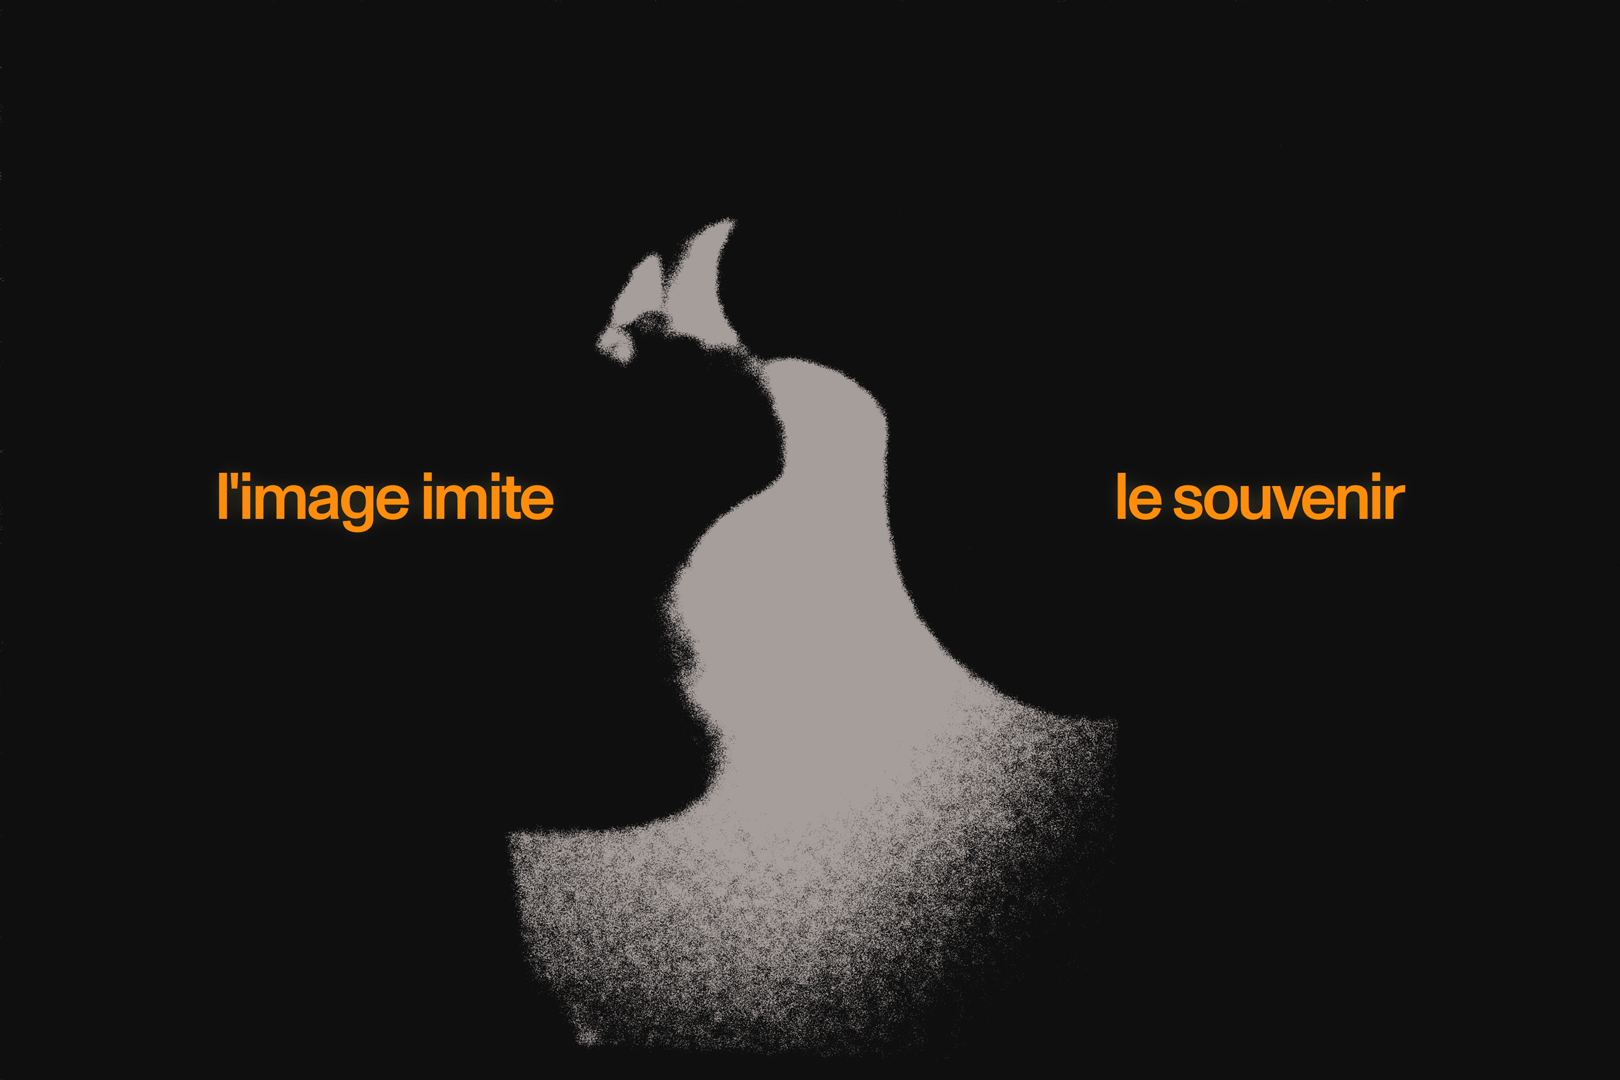 l'image imite le souvenir animation credits film credits fraud mightdeletelater poetry rotoscopy sequence